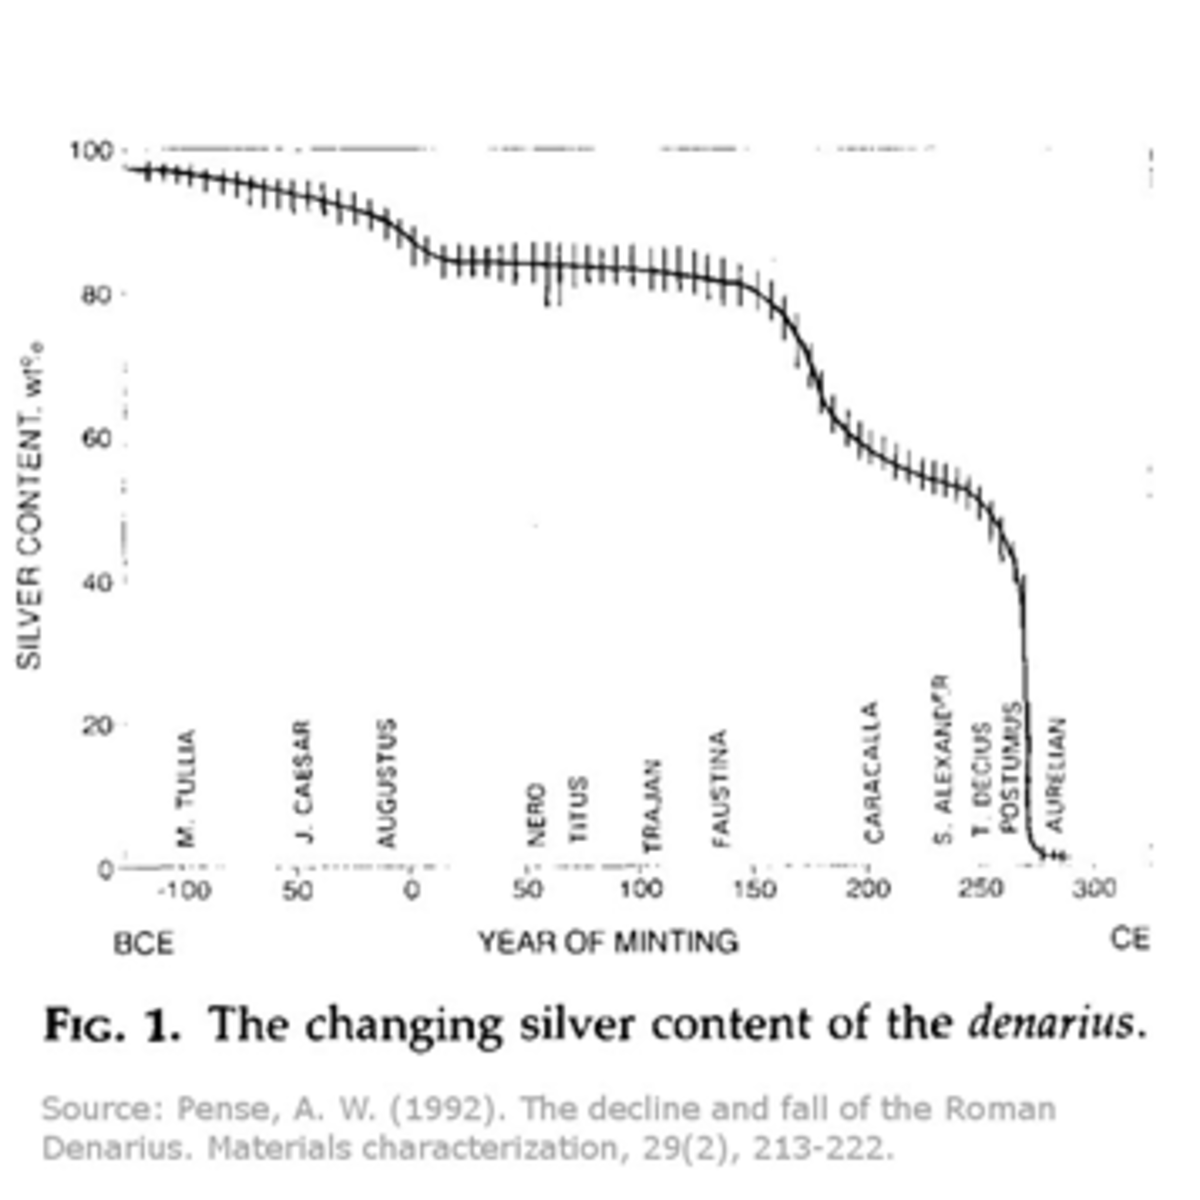 Source: Pense, A.W. (1992) “The Decline and Fall of the Roman Denarius” Materials characterization, 29(2), 213-222